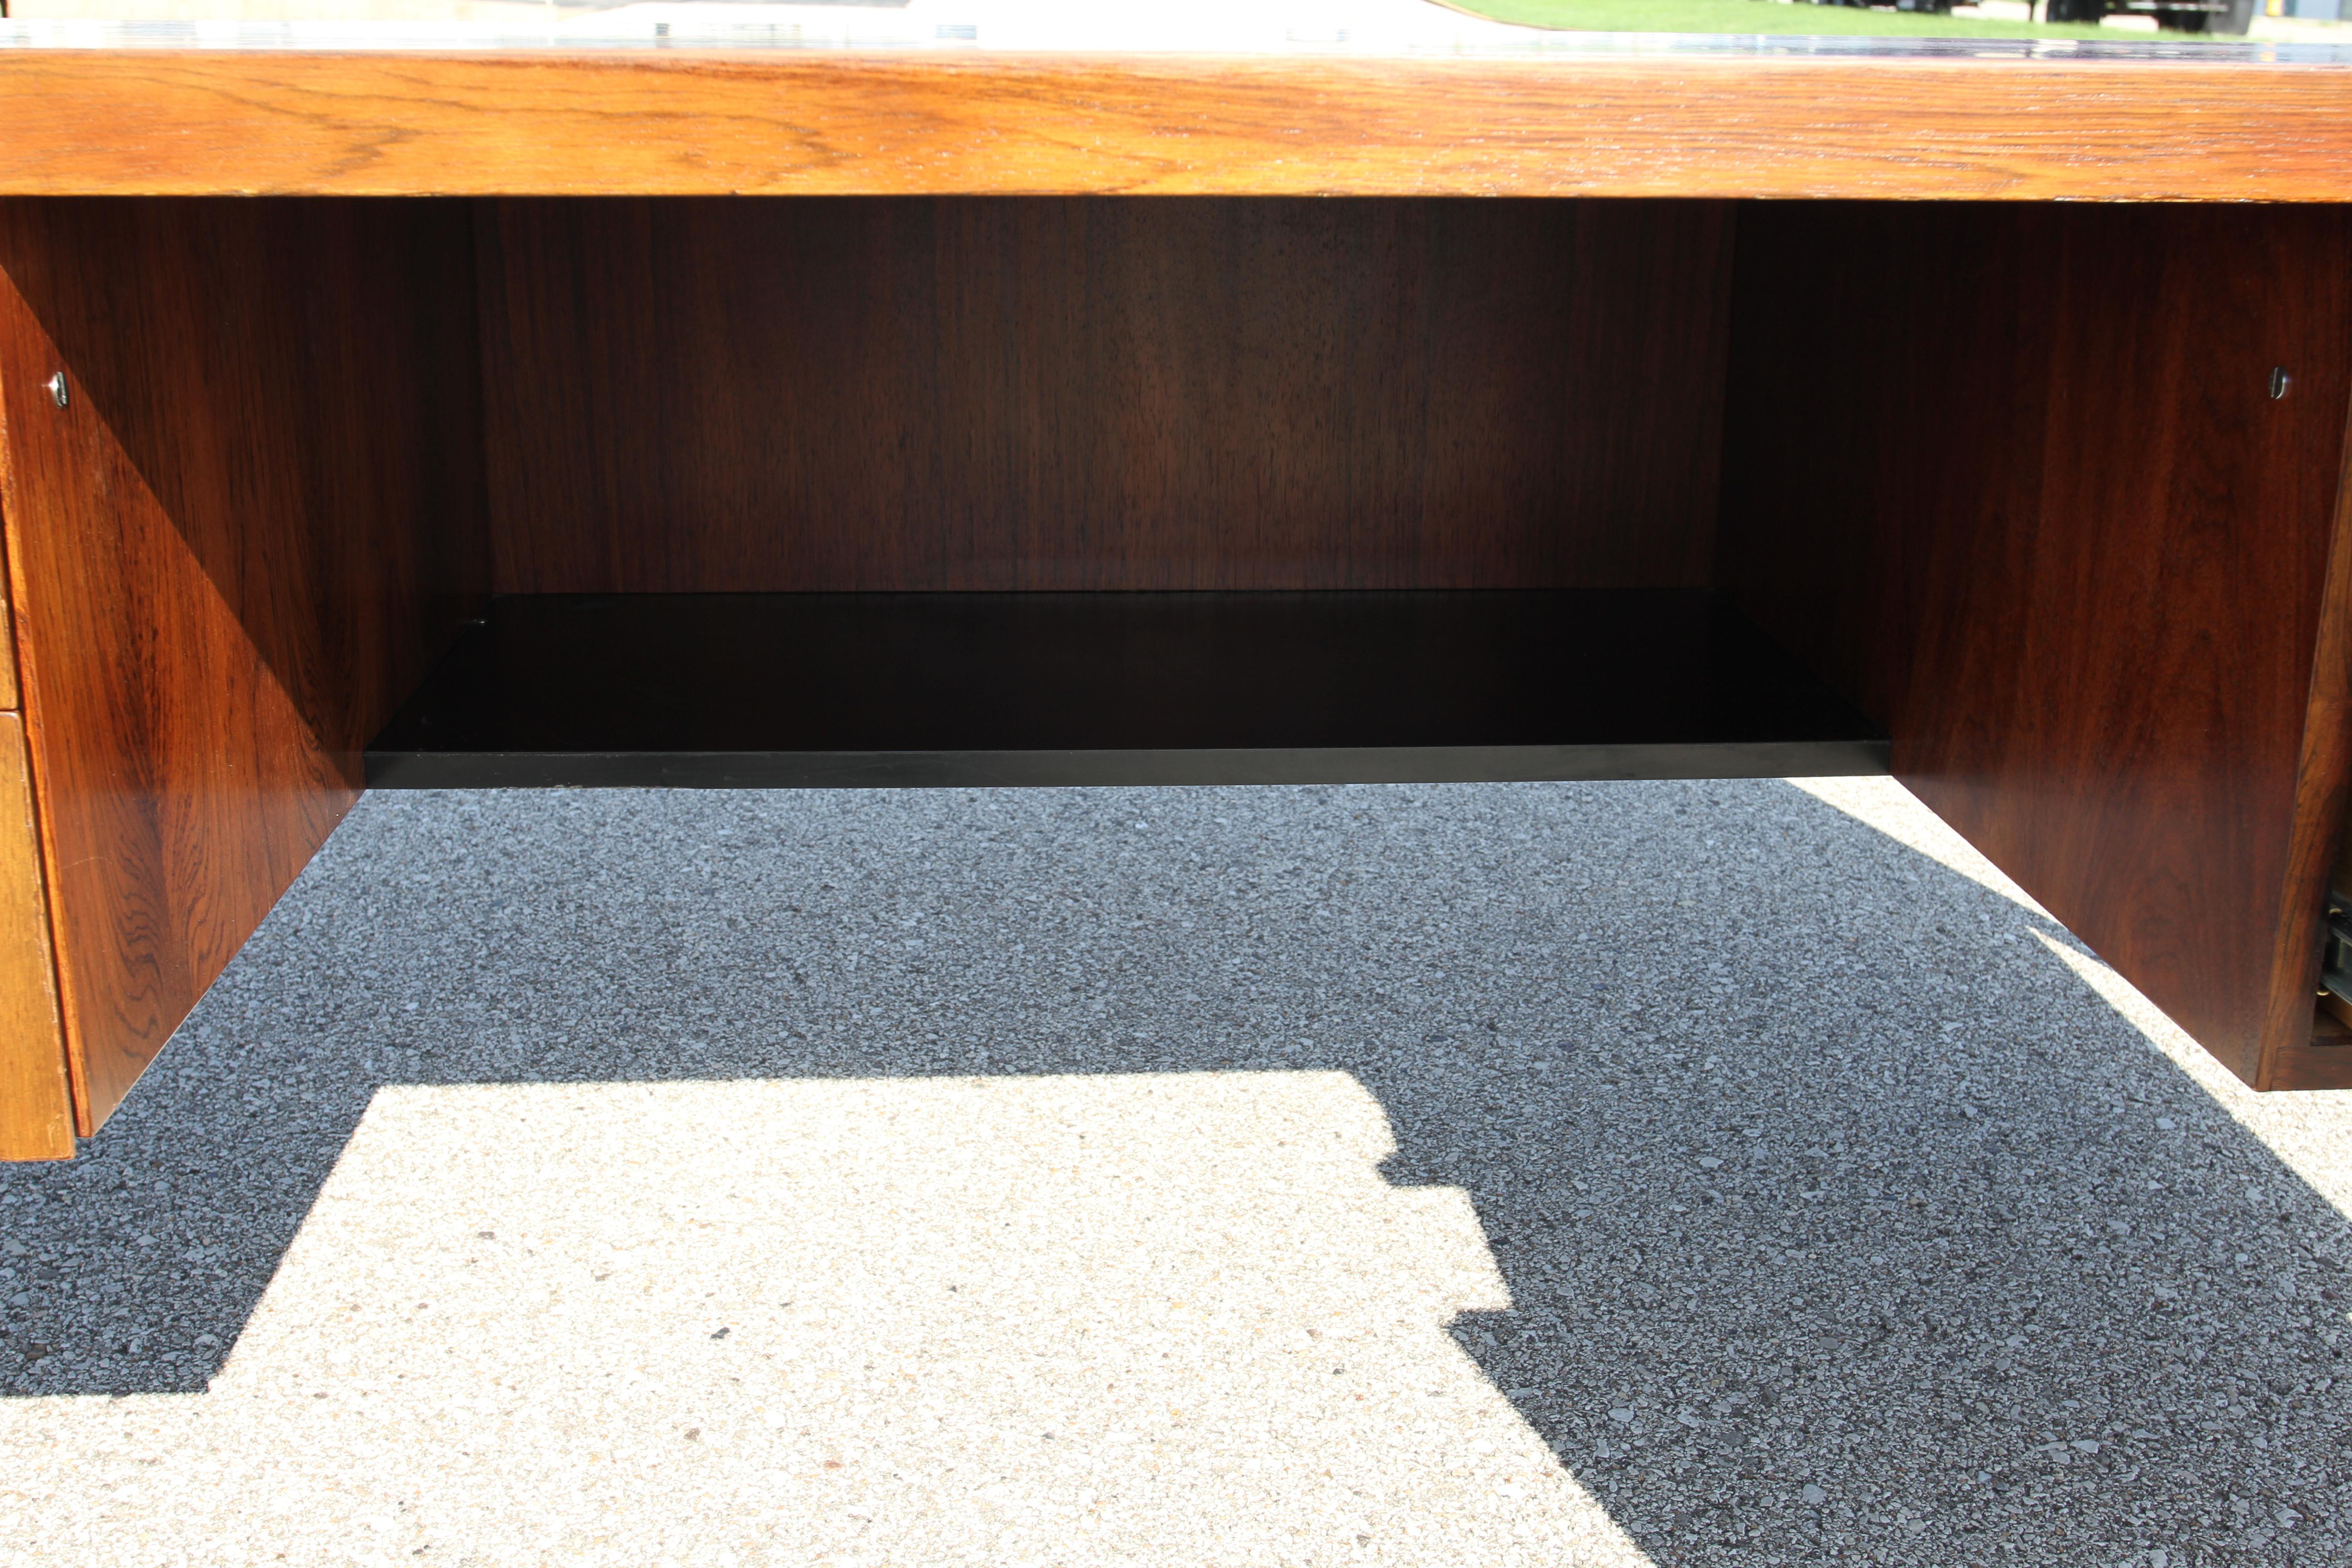 Richard Schultz for Knoll 1960s Mid-Century Modern Rosewood Executive Desk #4146 For Sale 13